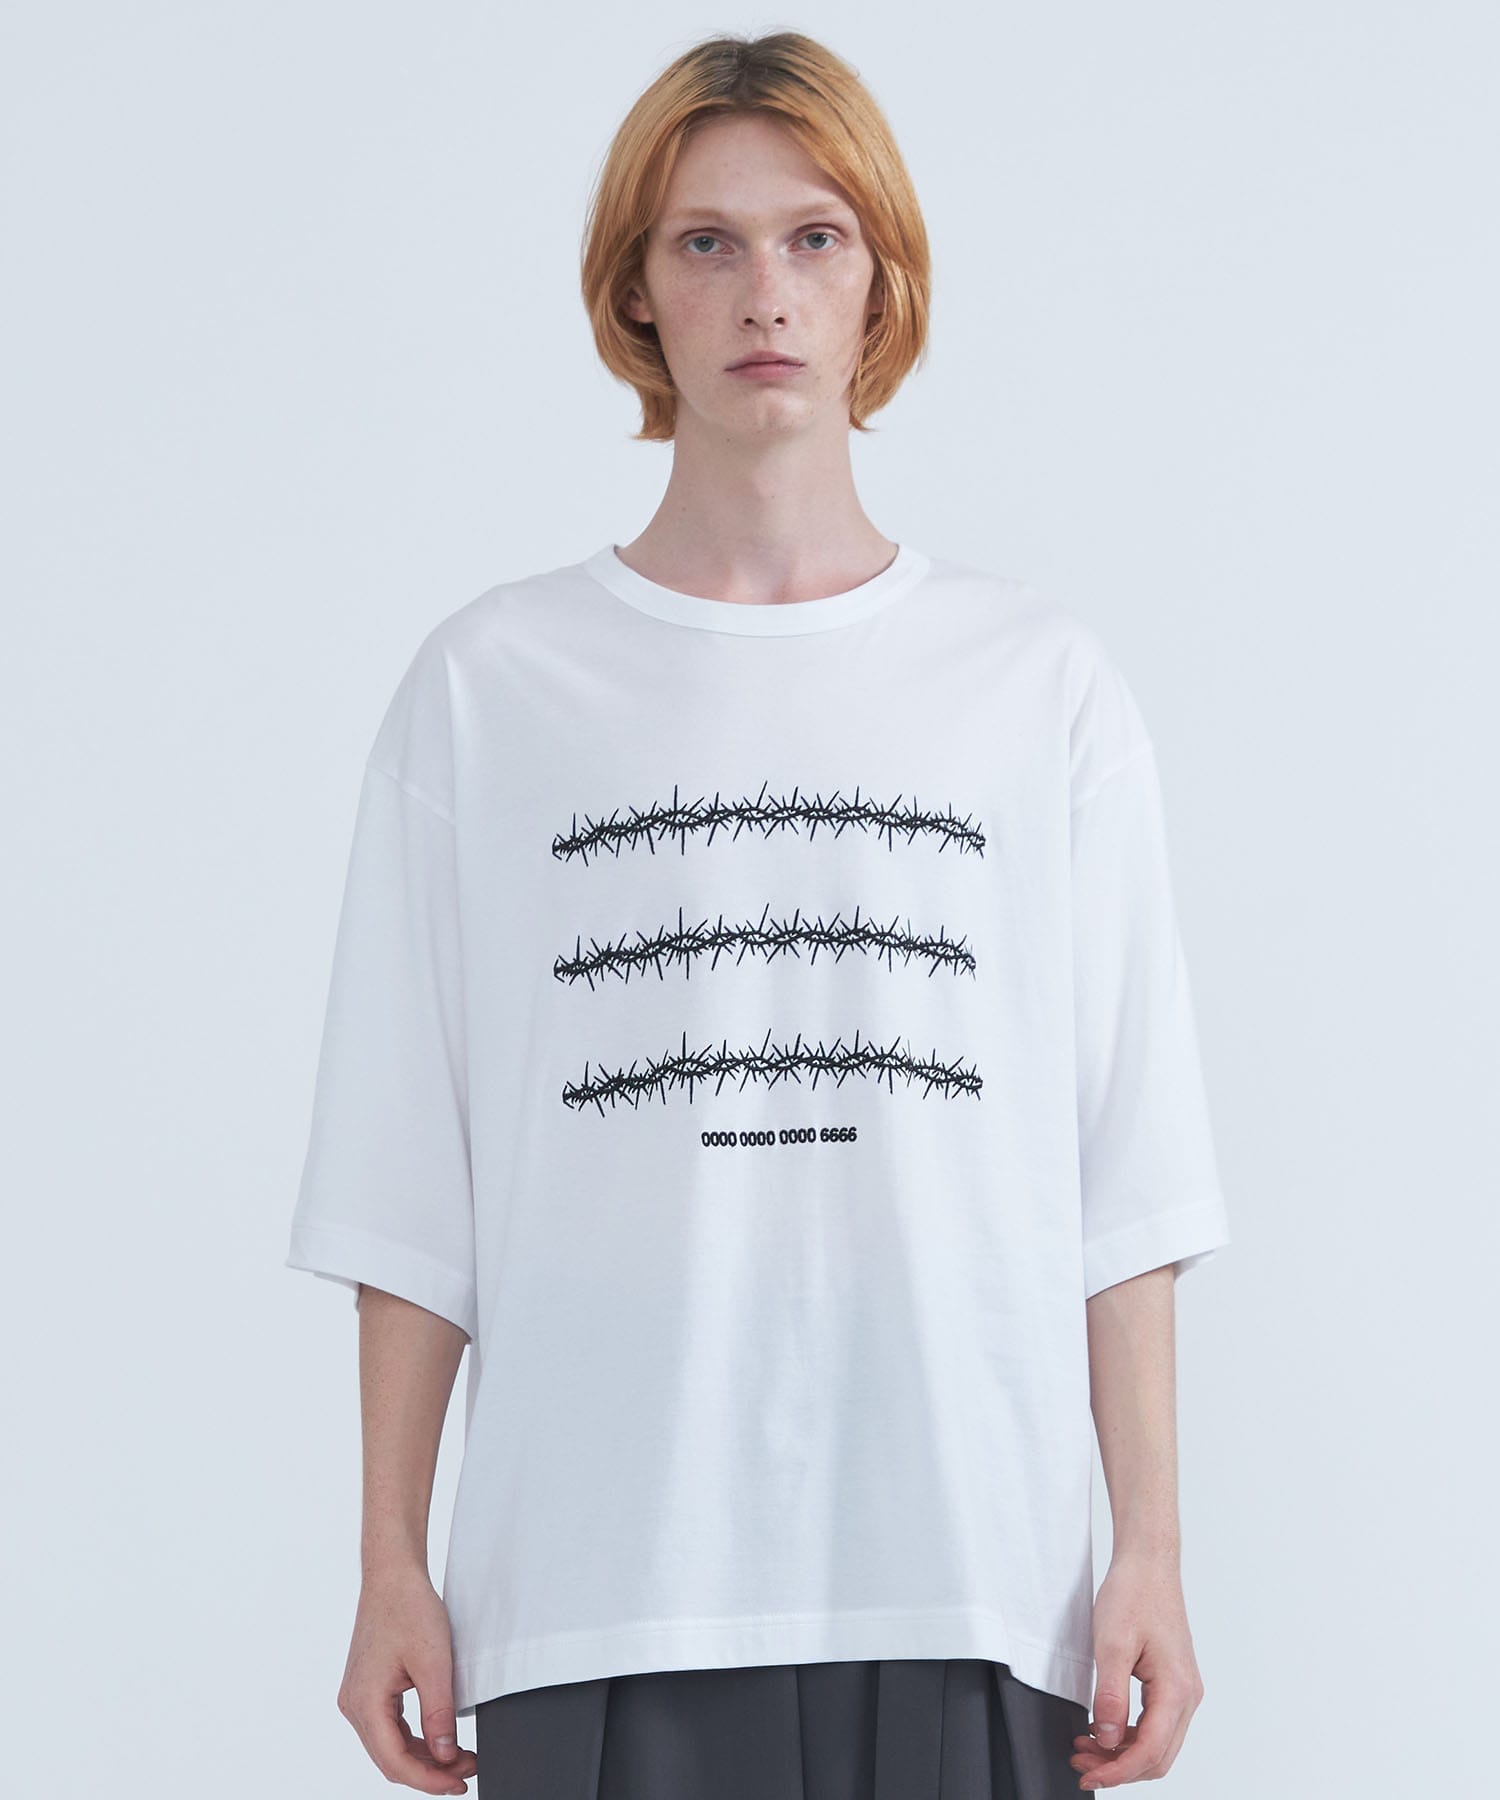 BARBED WIRE emb S/S BIG-T(1 WHITE): SHAREEF: MENS｜ STUDIOUS 